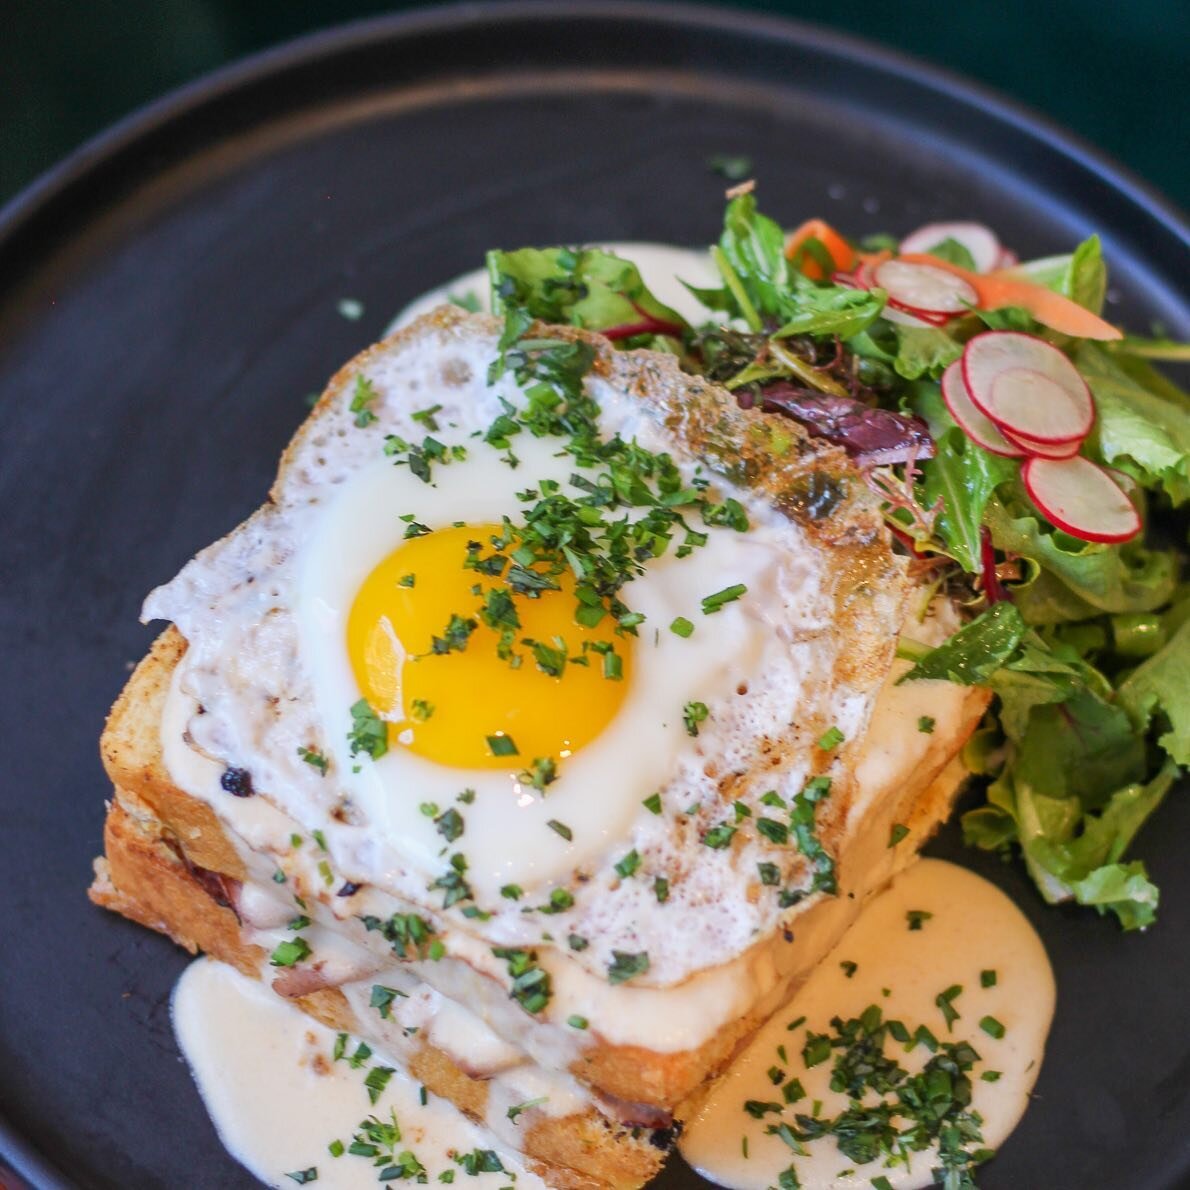 Our Croque Madame called your name this weekend #sundaybrunch 💕❤️
--
Psss we are opening on Sunday night, from 5 pm till late 🌚